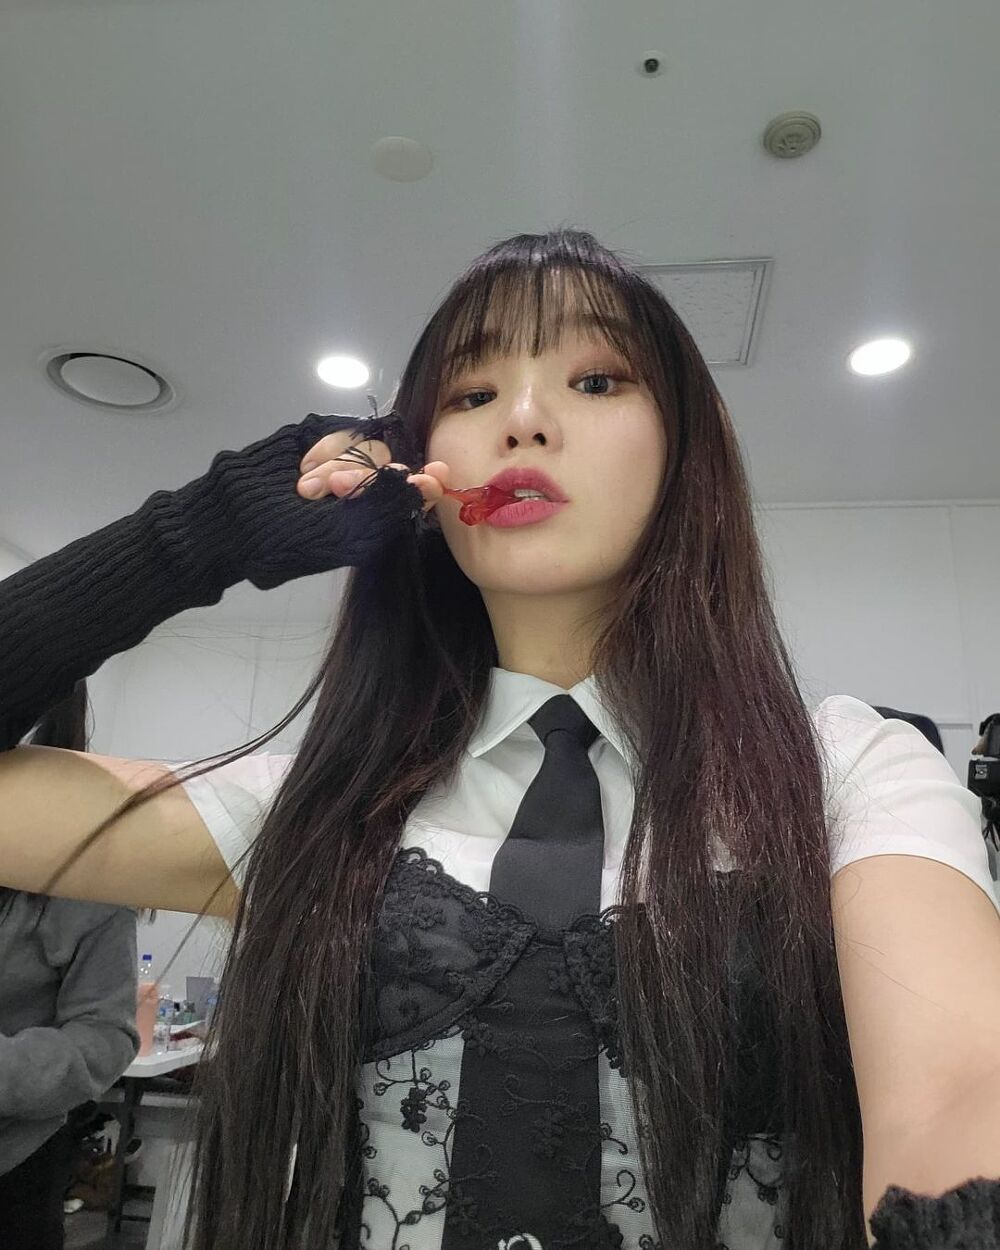 OH MY GIRL's Seunghee with a black lace bra on the outside.